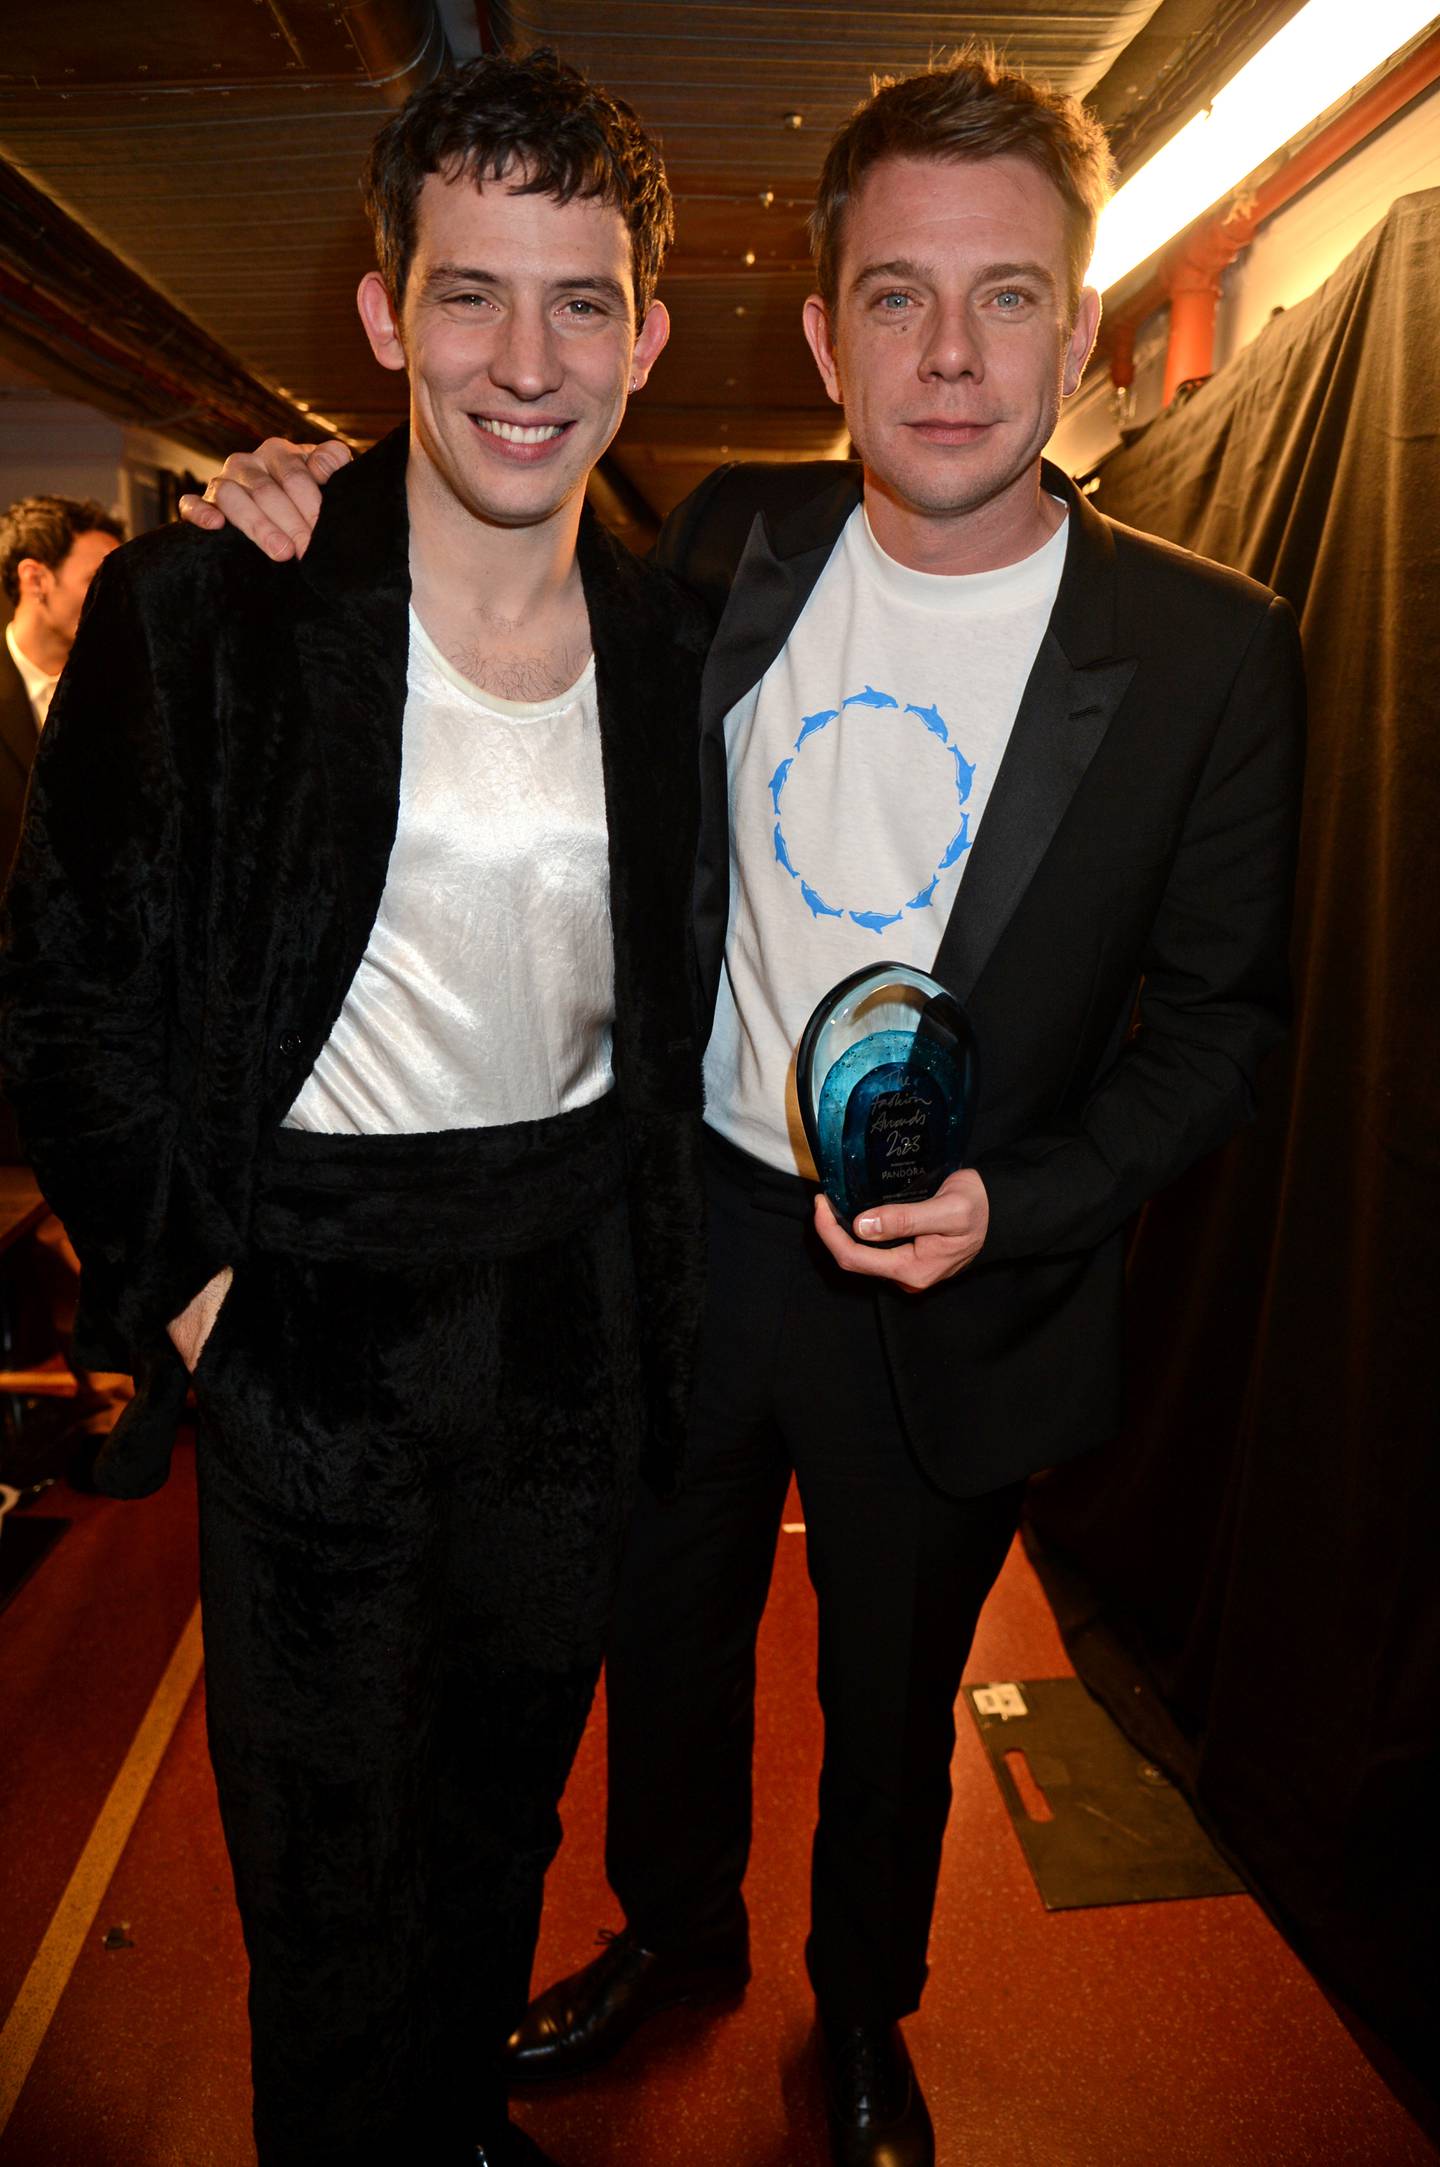 Designer Jonathan Anderson for JW Anderson and LOEWE won Designer of the Year Award.